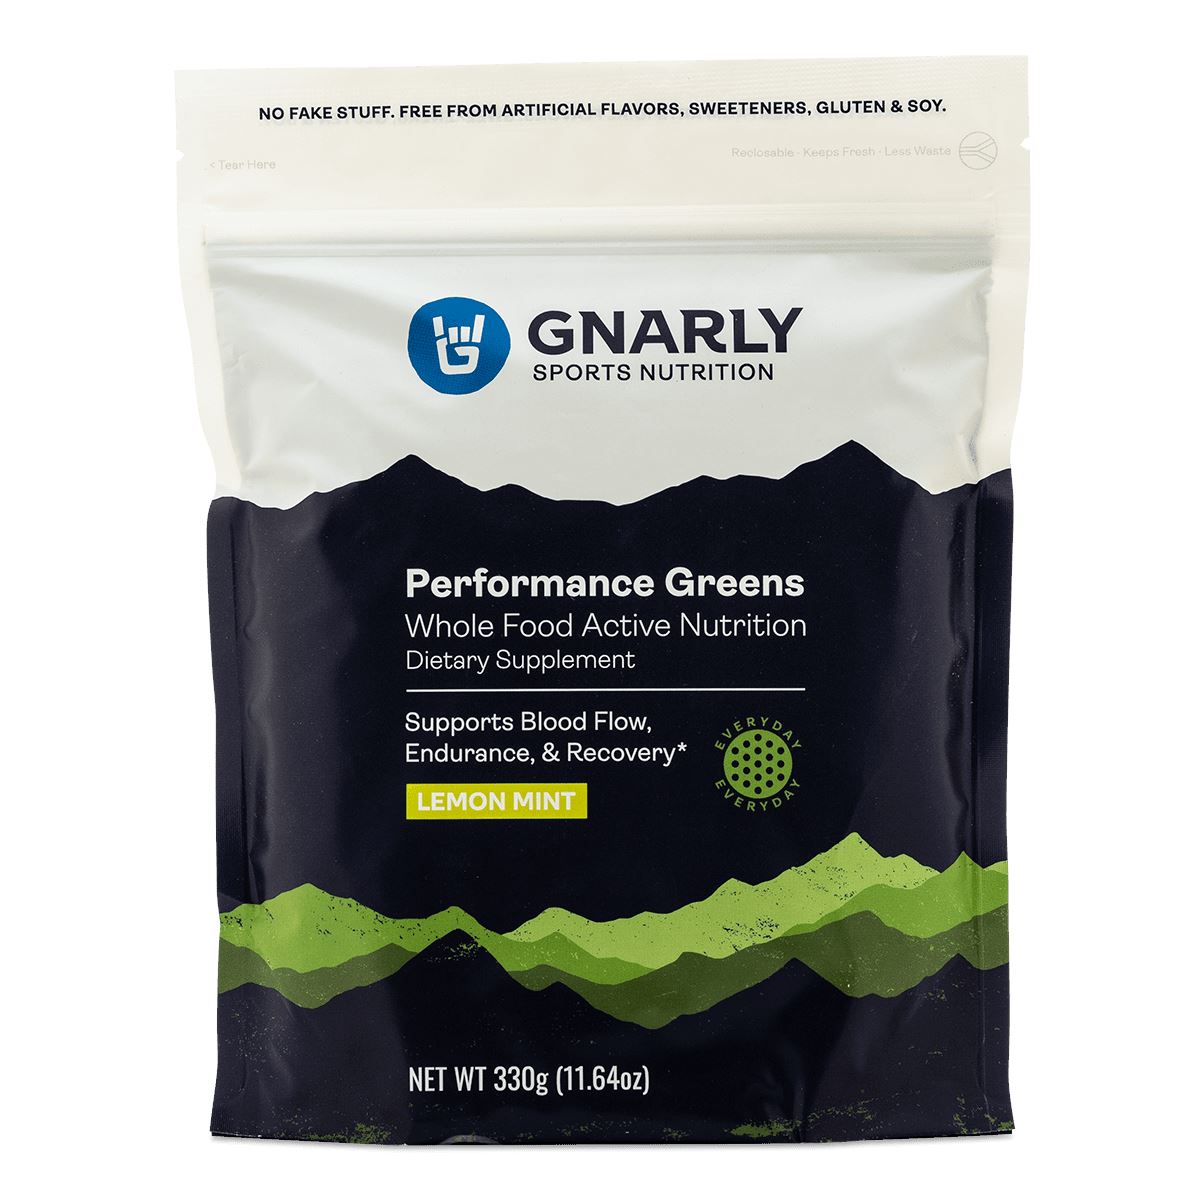 Gnarly Performance Greens by Gnarly Nutrition